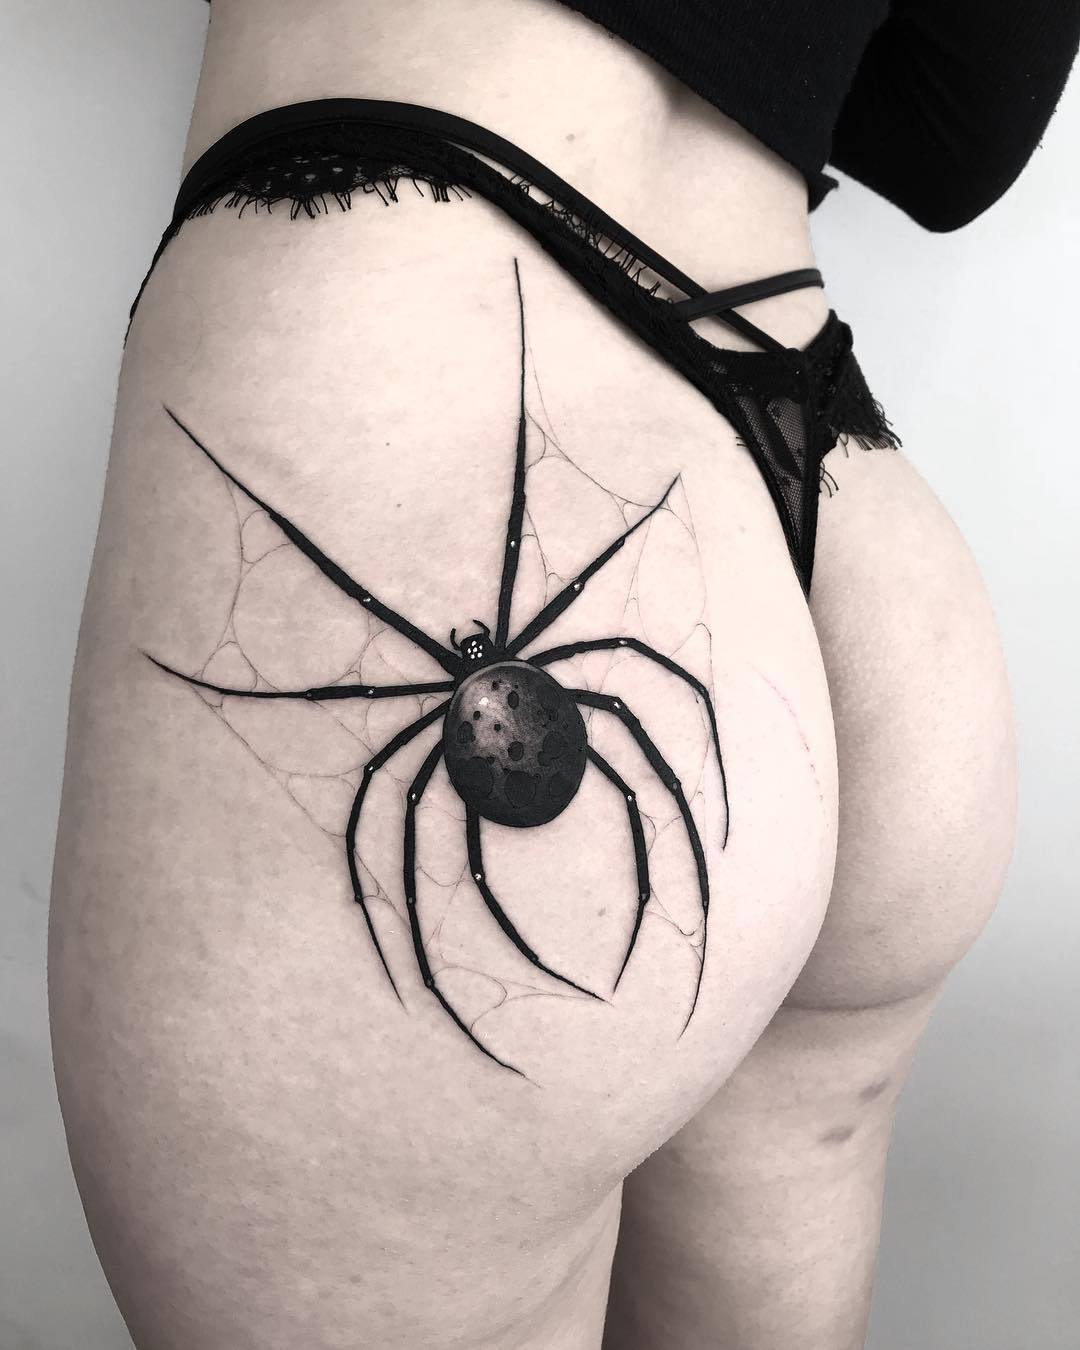 Exploring the erotic significance of spider tattoos